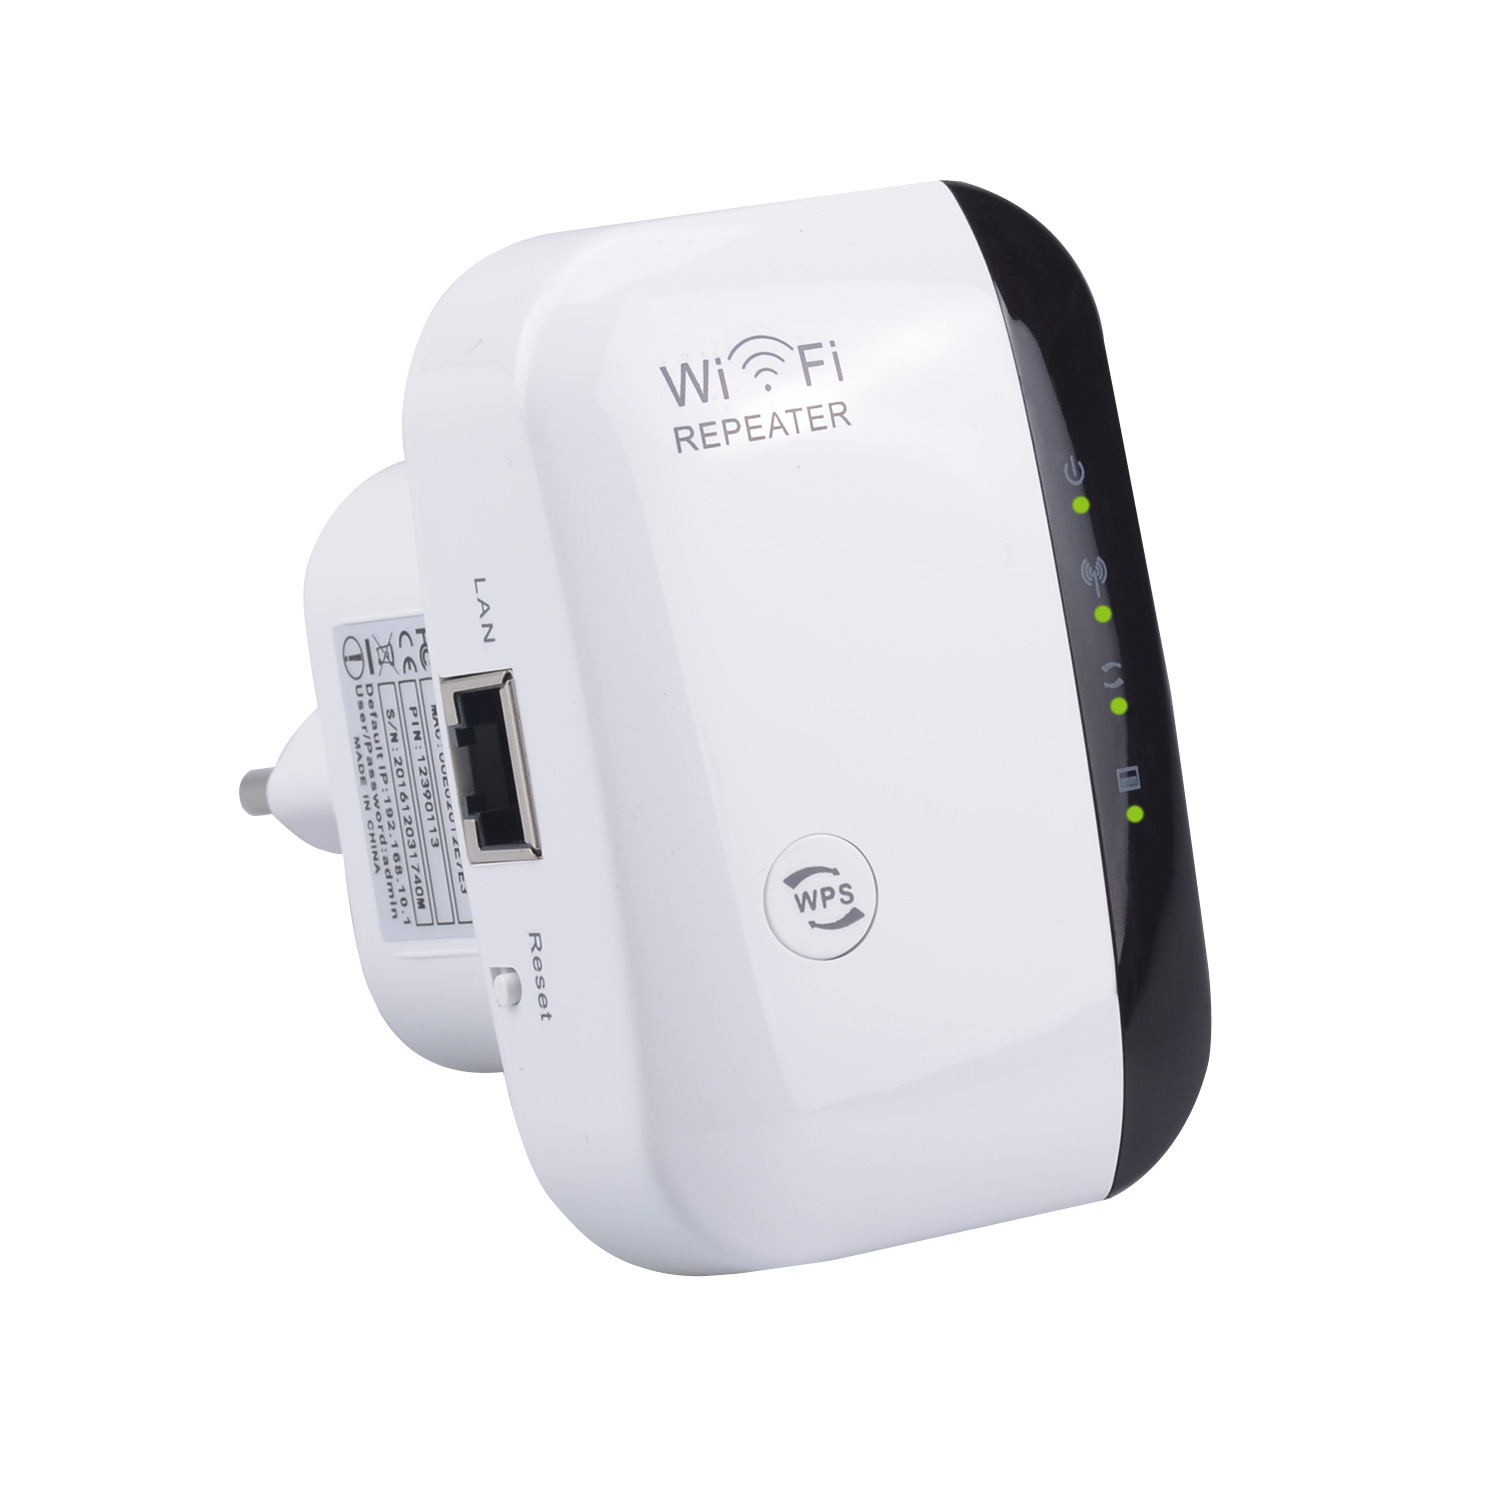 300Mbps WiFi Repeater WiFi Range Extender Coverage WiFi Extender Wireless Repeater Signal Amplifier